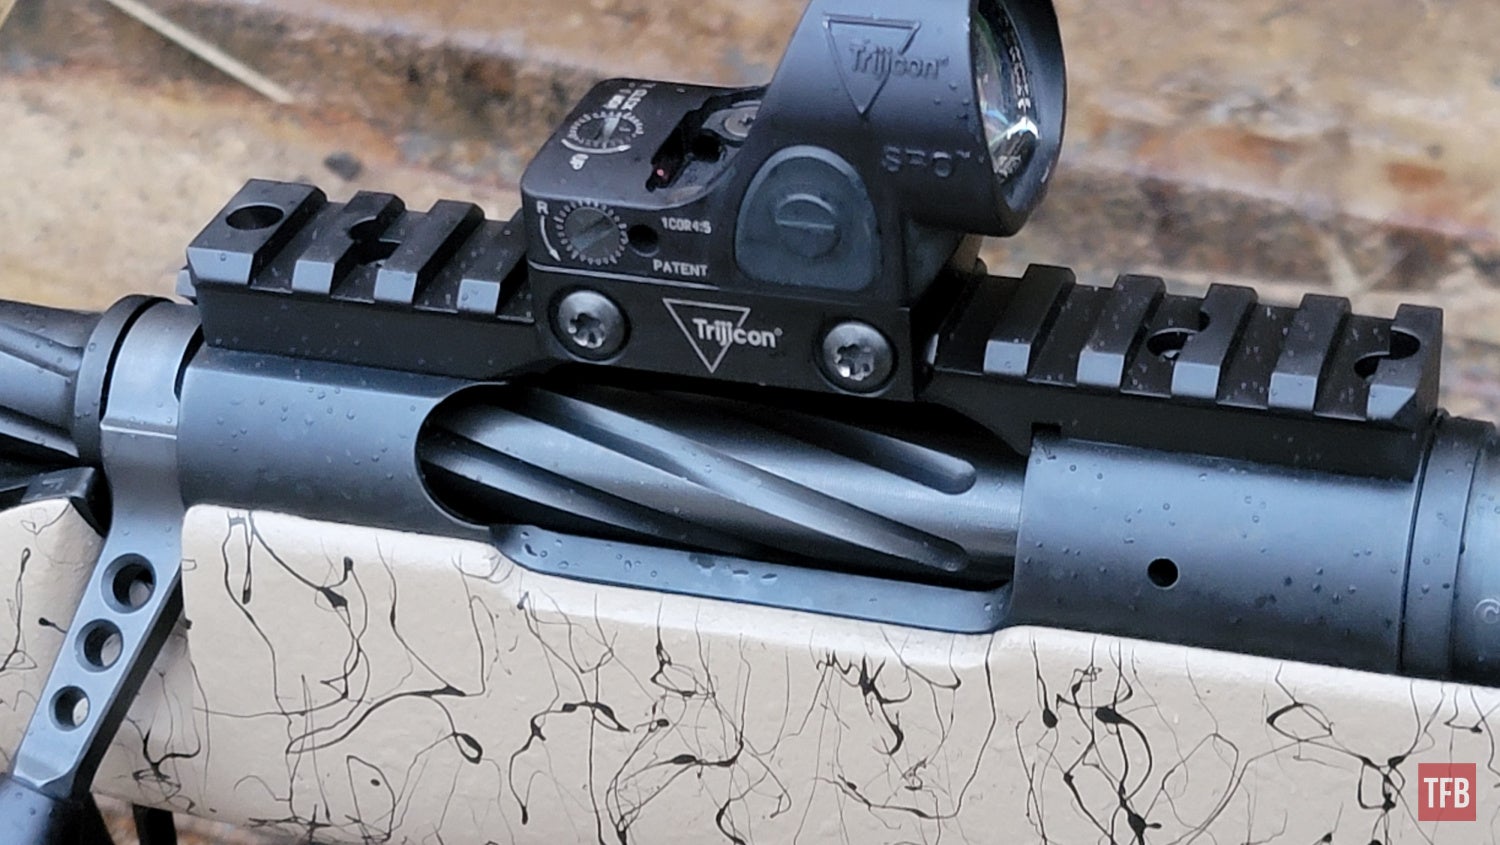 TFB Review: The Christensen Arms Ridgeline Scout Rifle